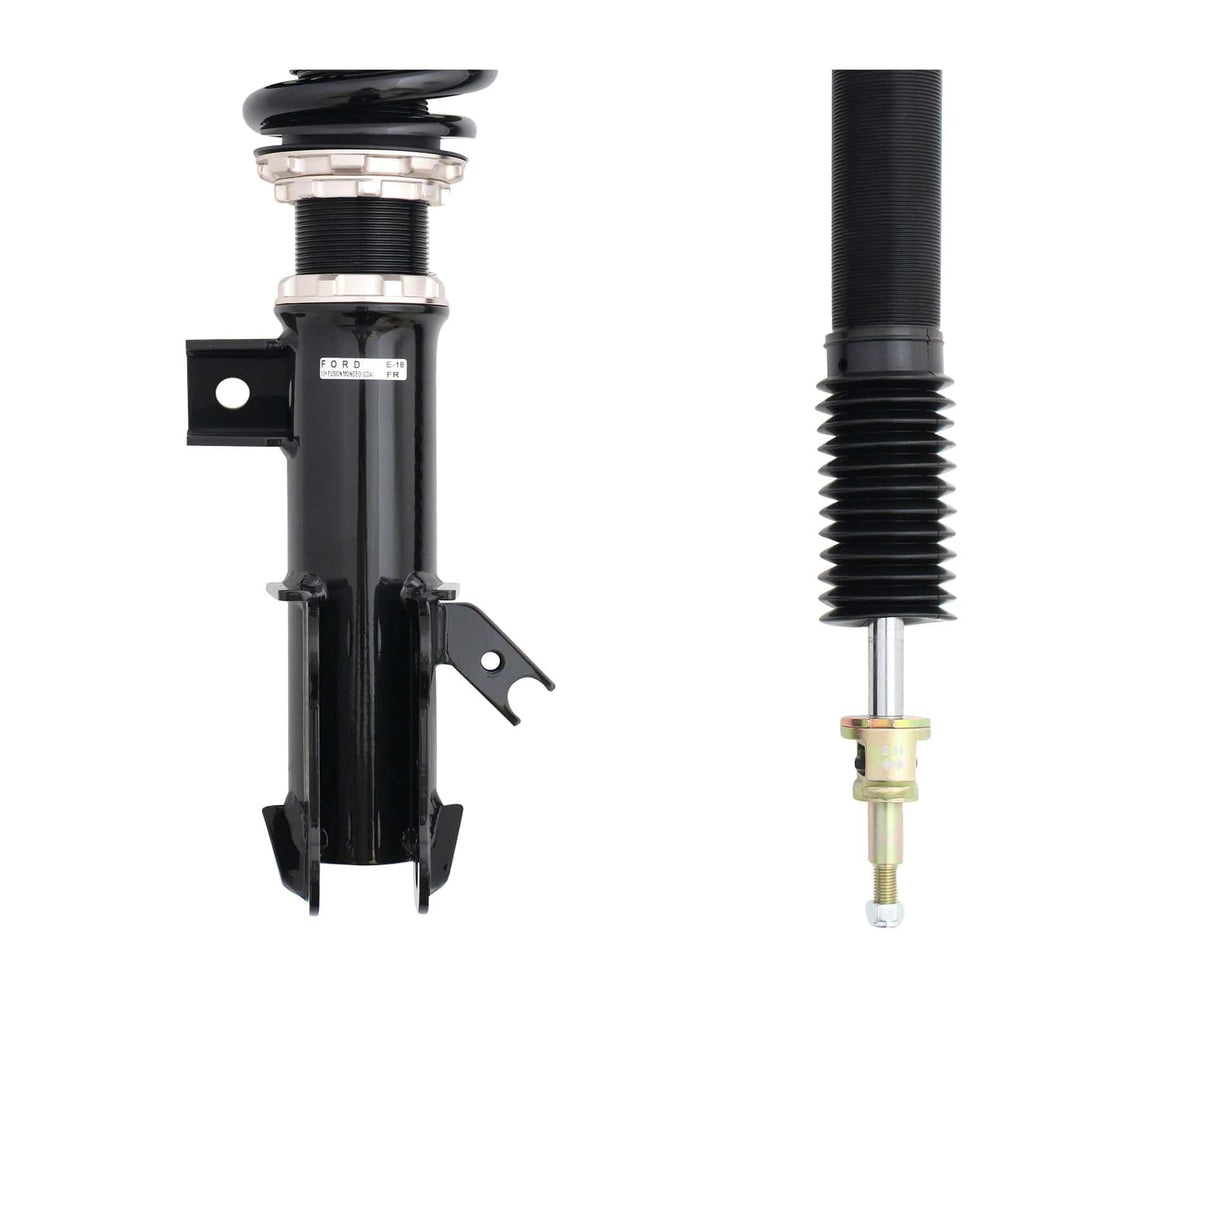 BC Racing BR Series Coilovers for 2013-2020 Ford Fusion (CD4)